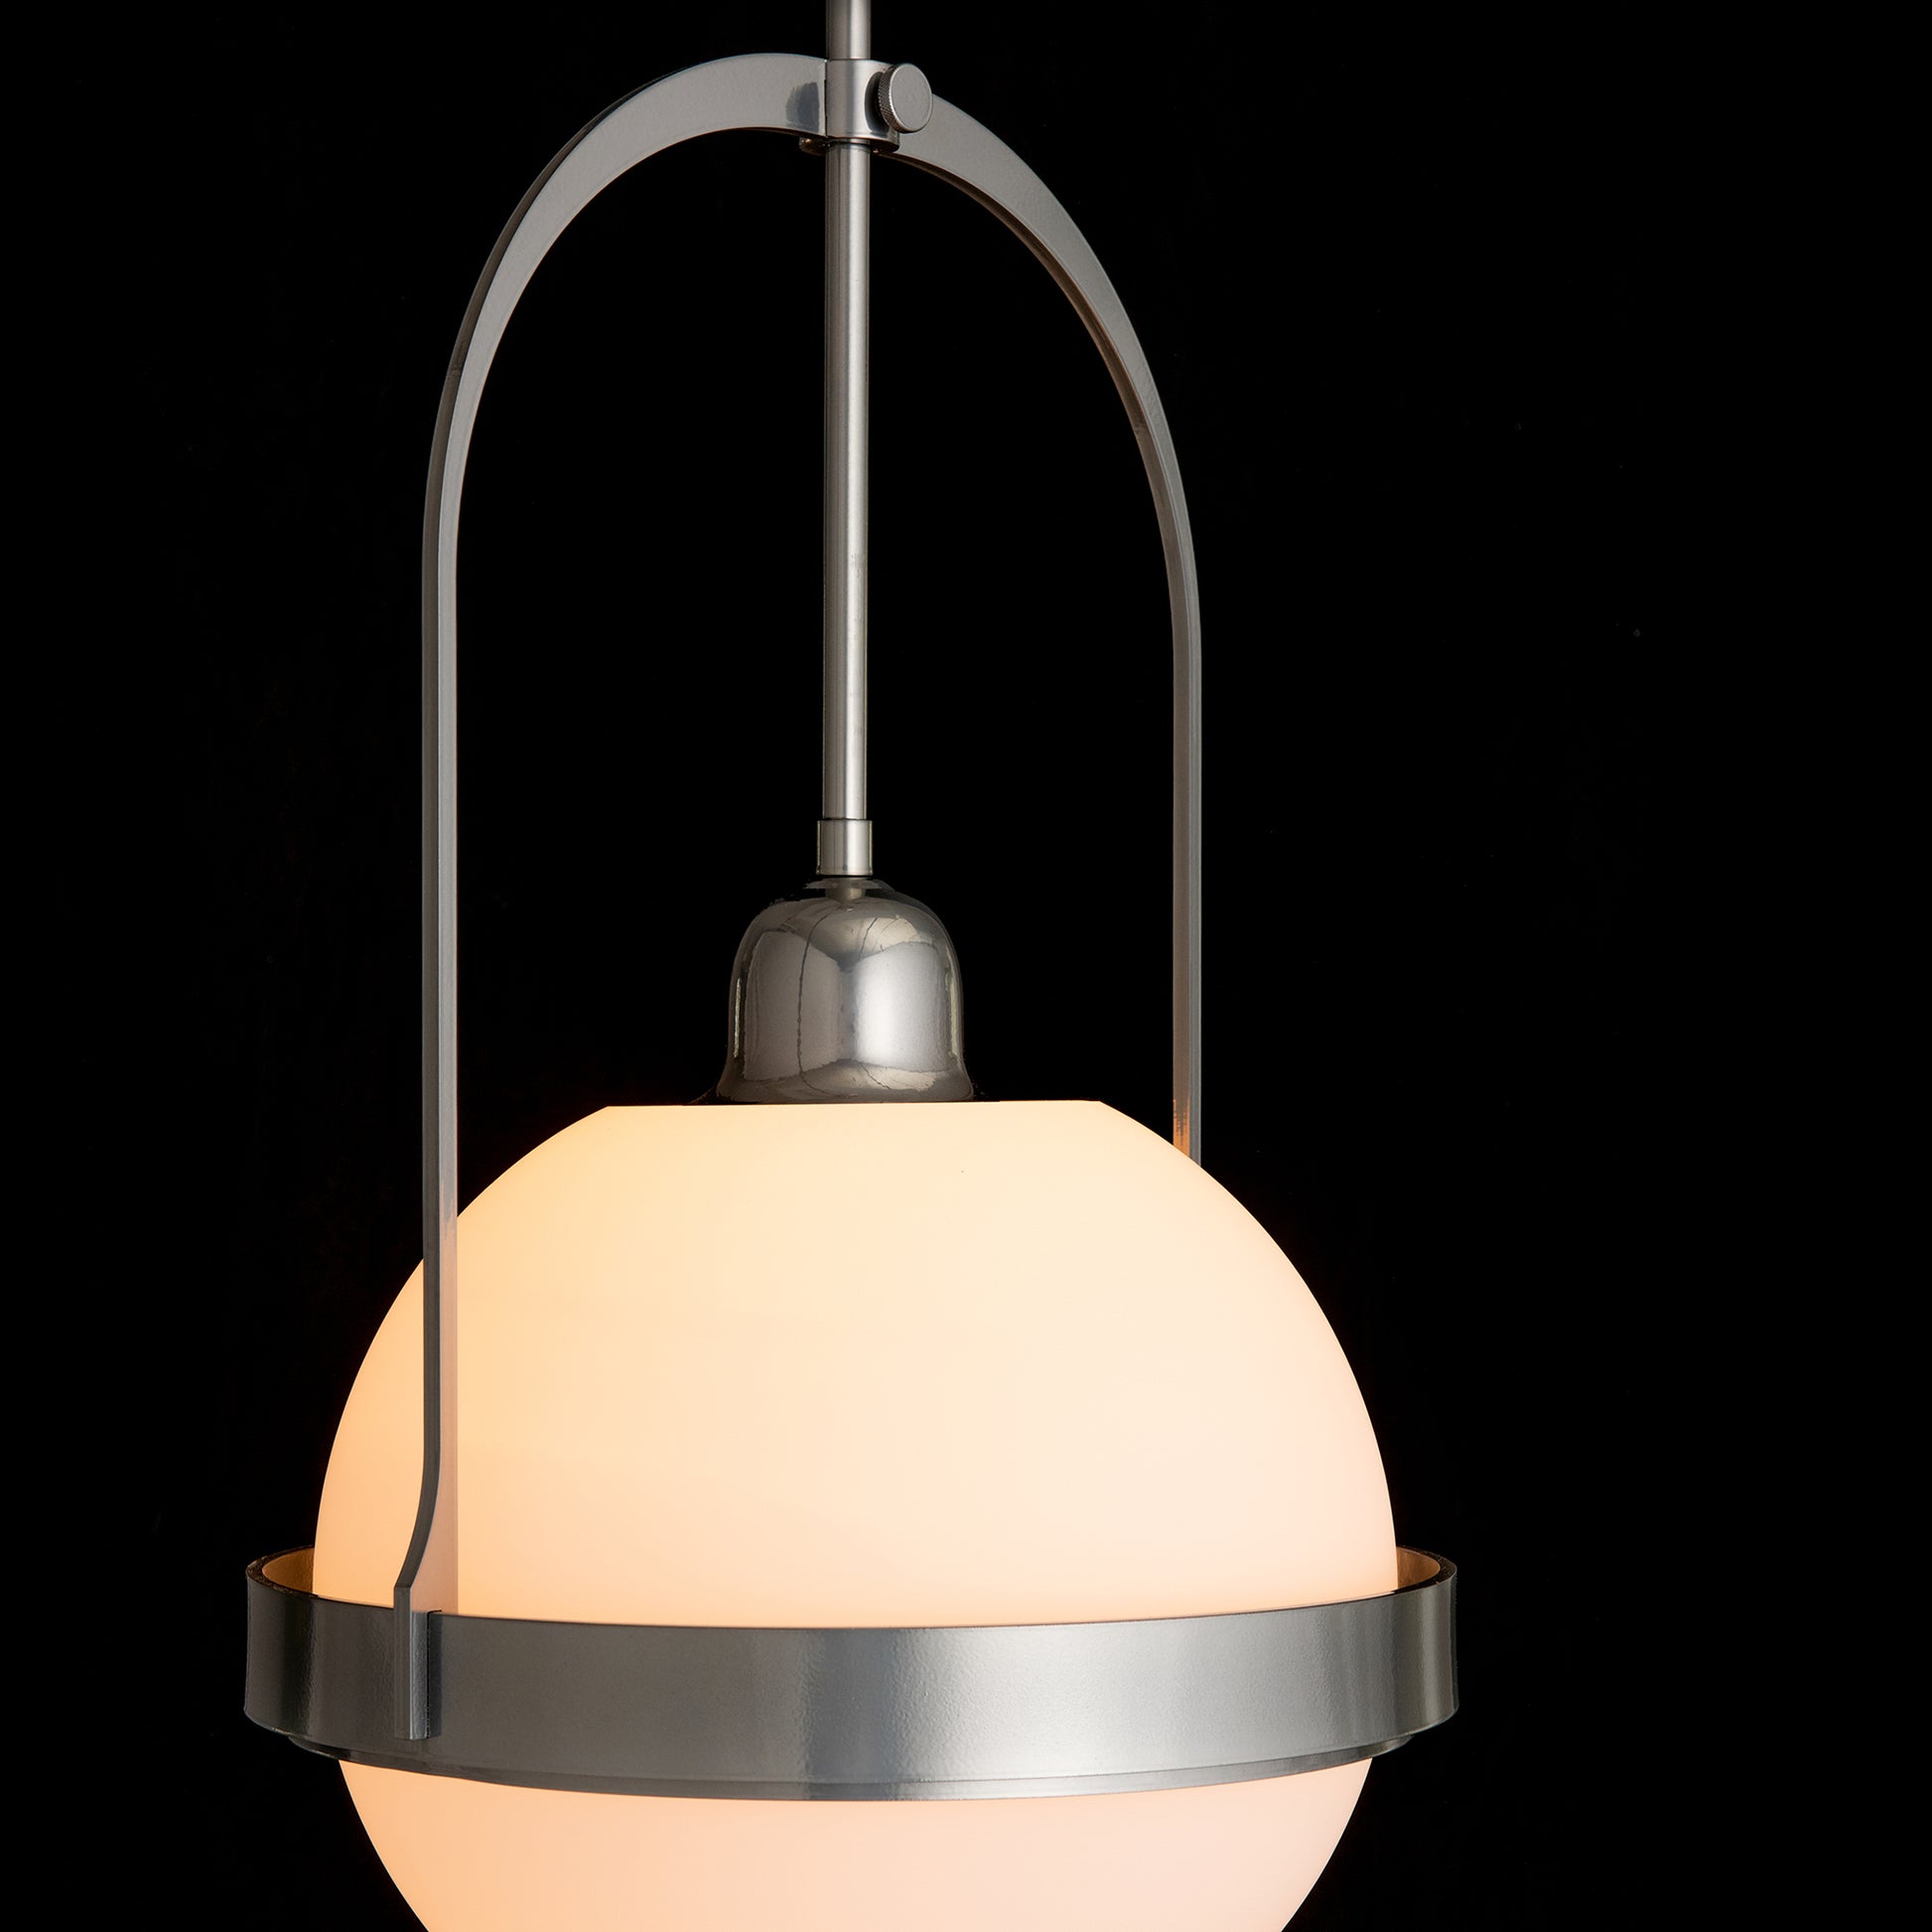 The Hubbardton Forge Atlas Mini Pendant is a Hubbardton Forge lighting fixture, handcrafted in Vermont, with a stunning glass globe hanging from it.